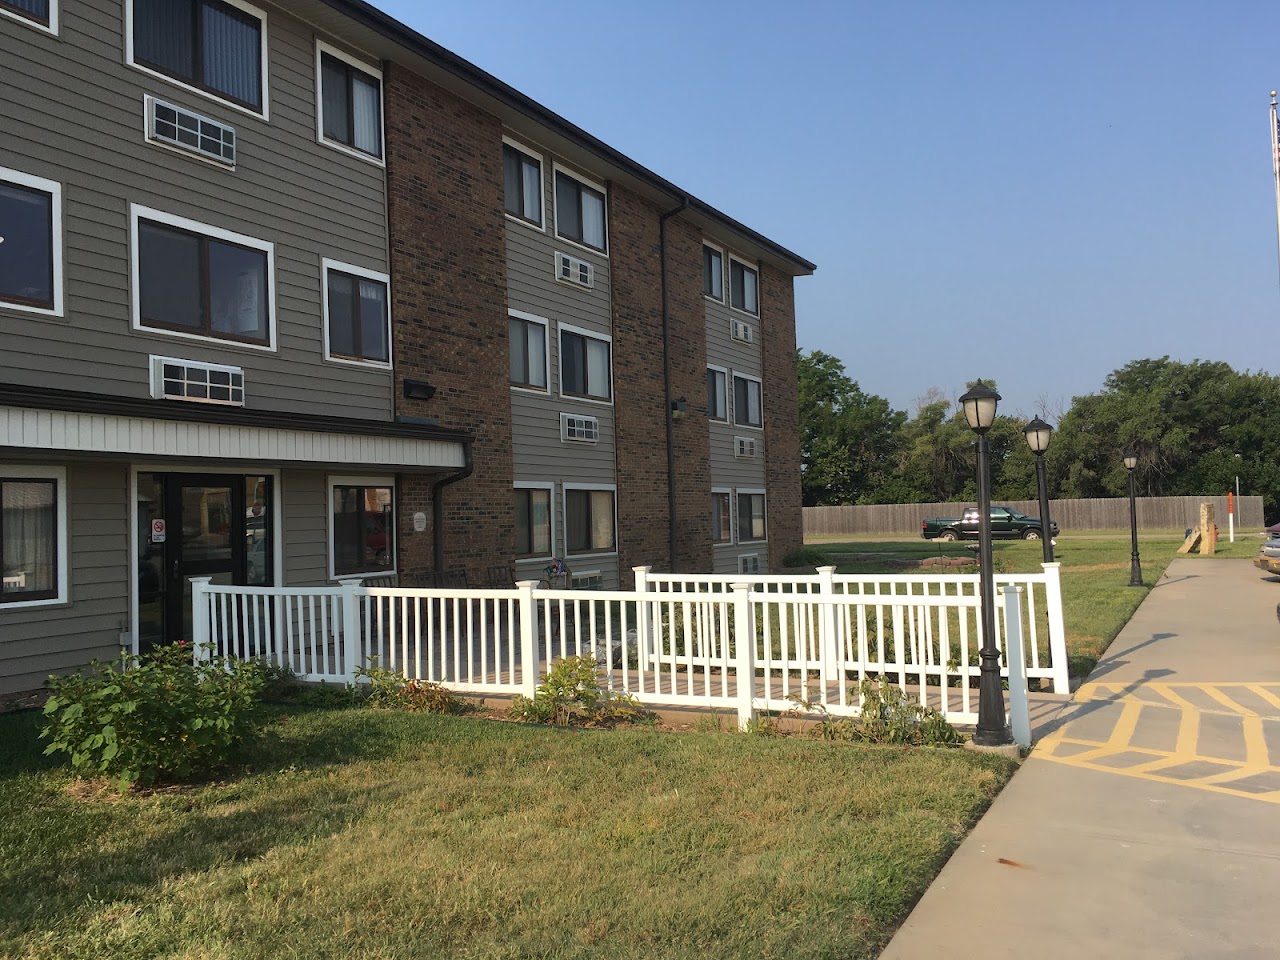 Photo of Lincoln Housing Authority. Affordable housing located at 107 E COURT LINCOLN, KS 67455